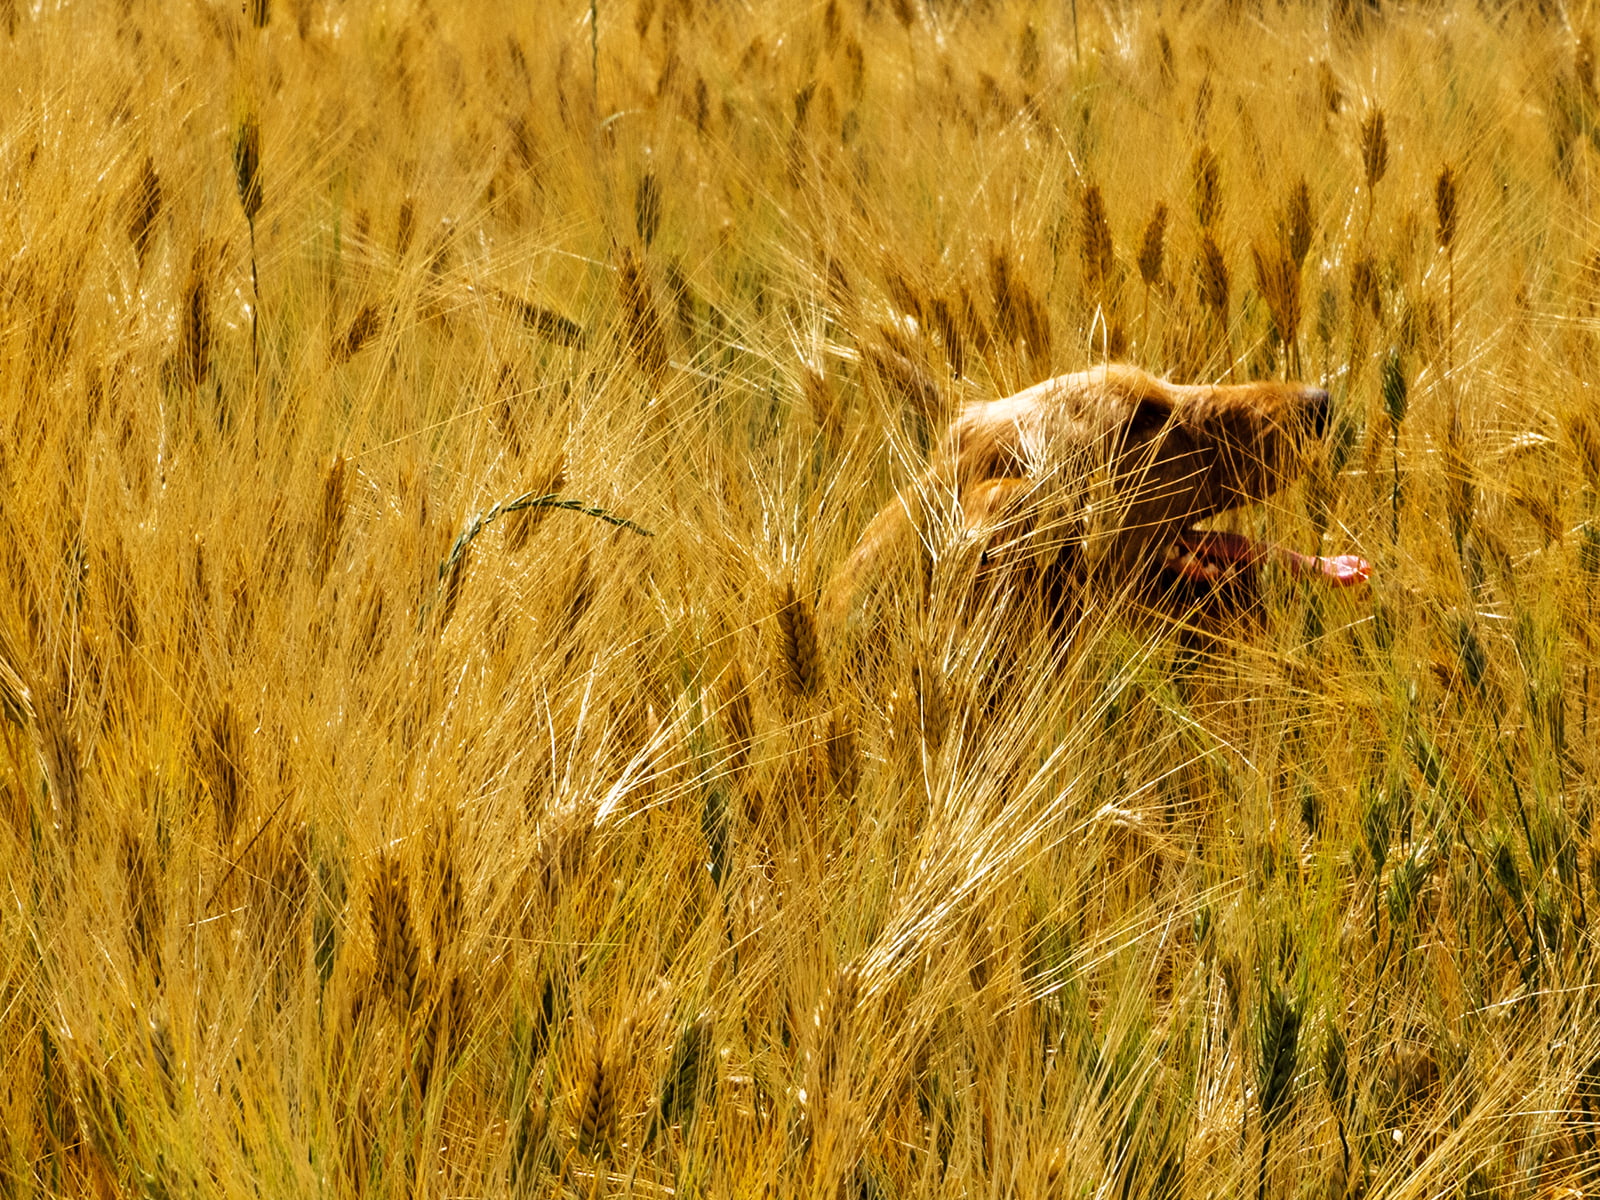 brown dog in the middle of wheat field